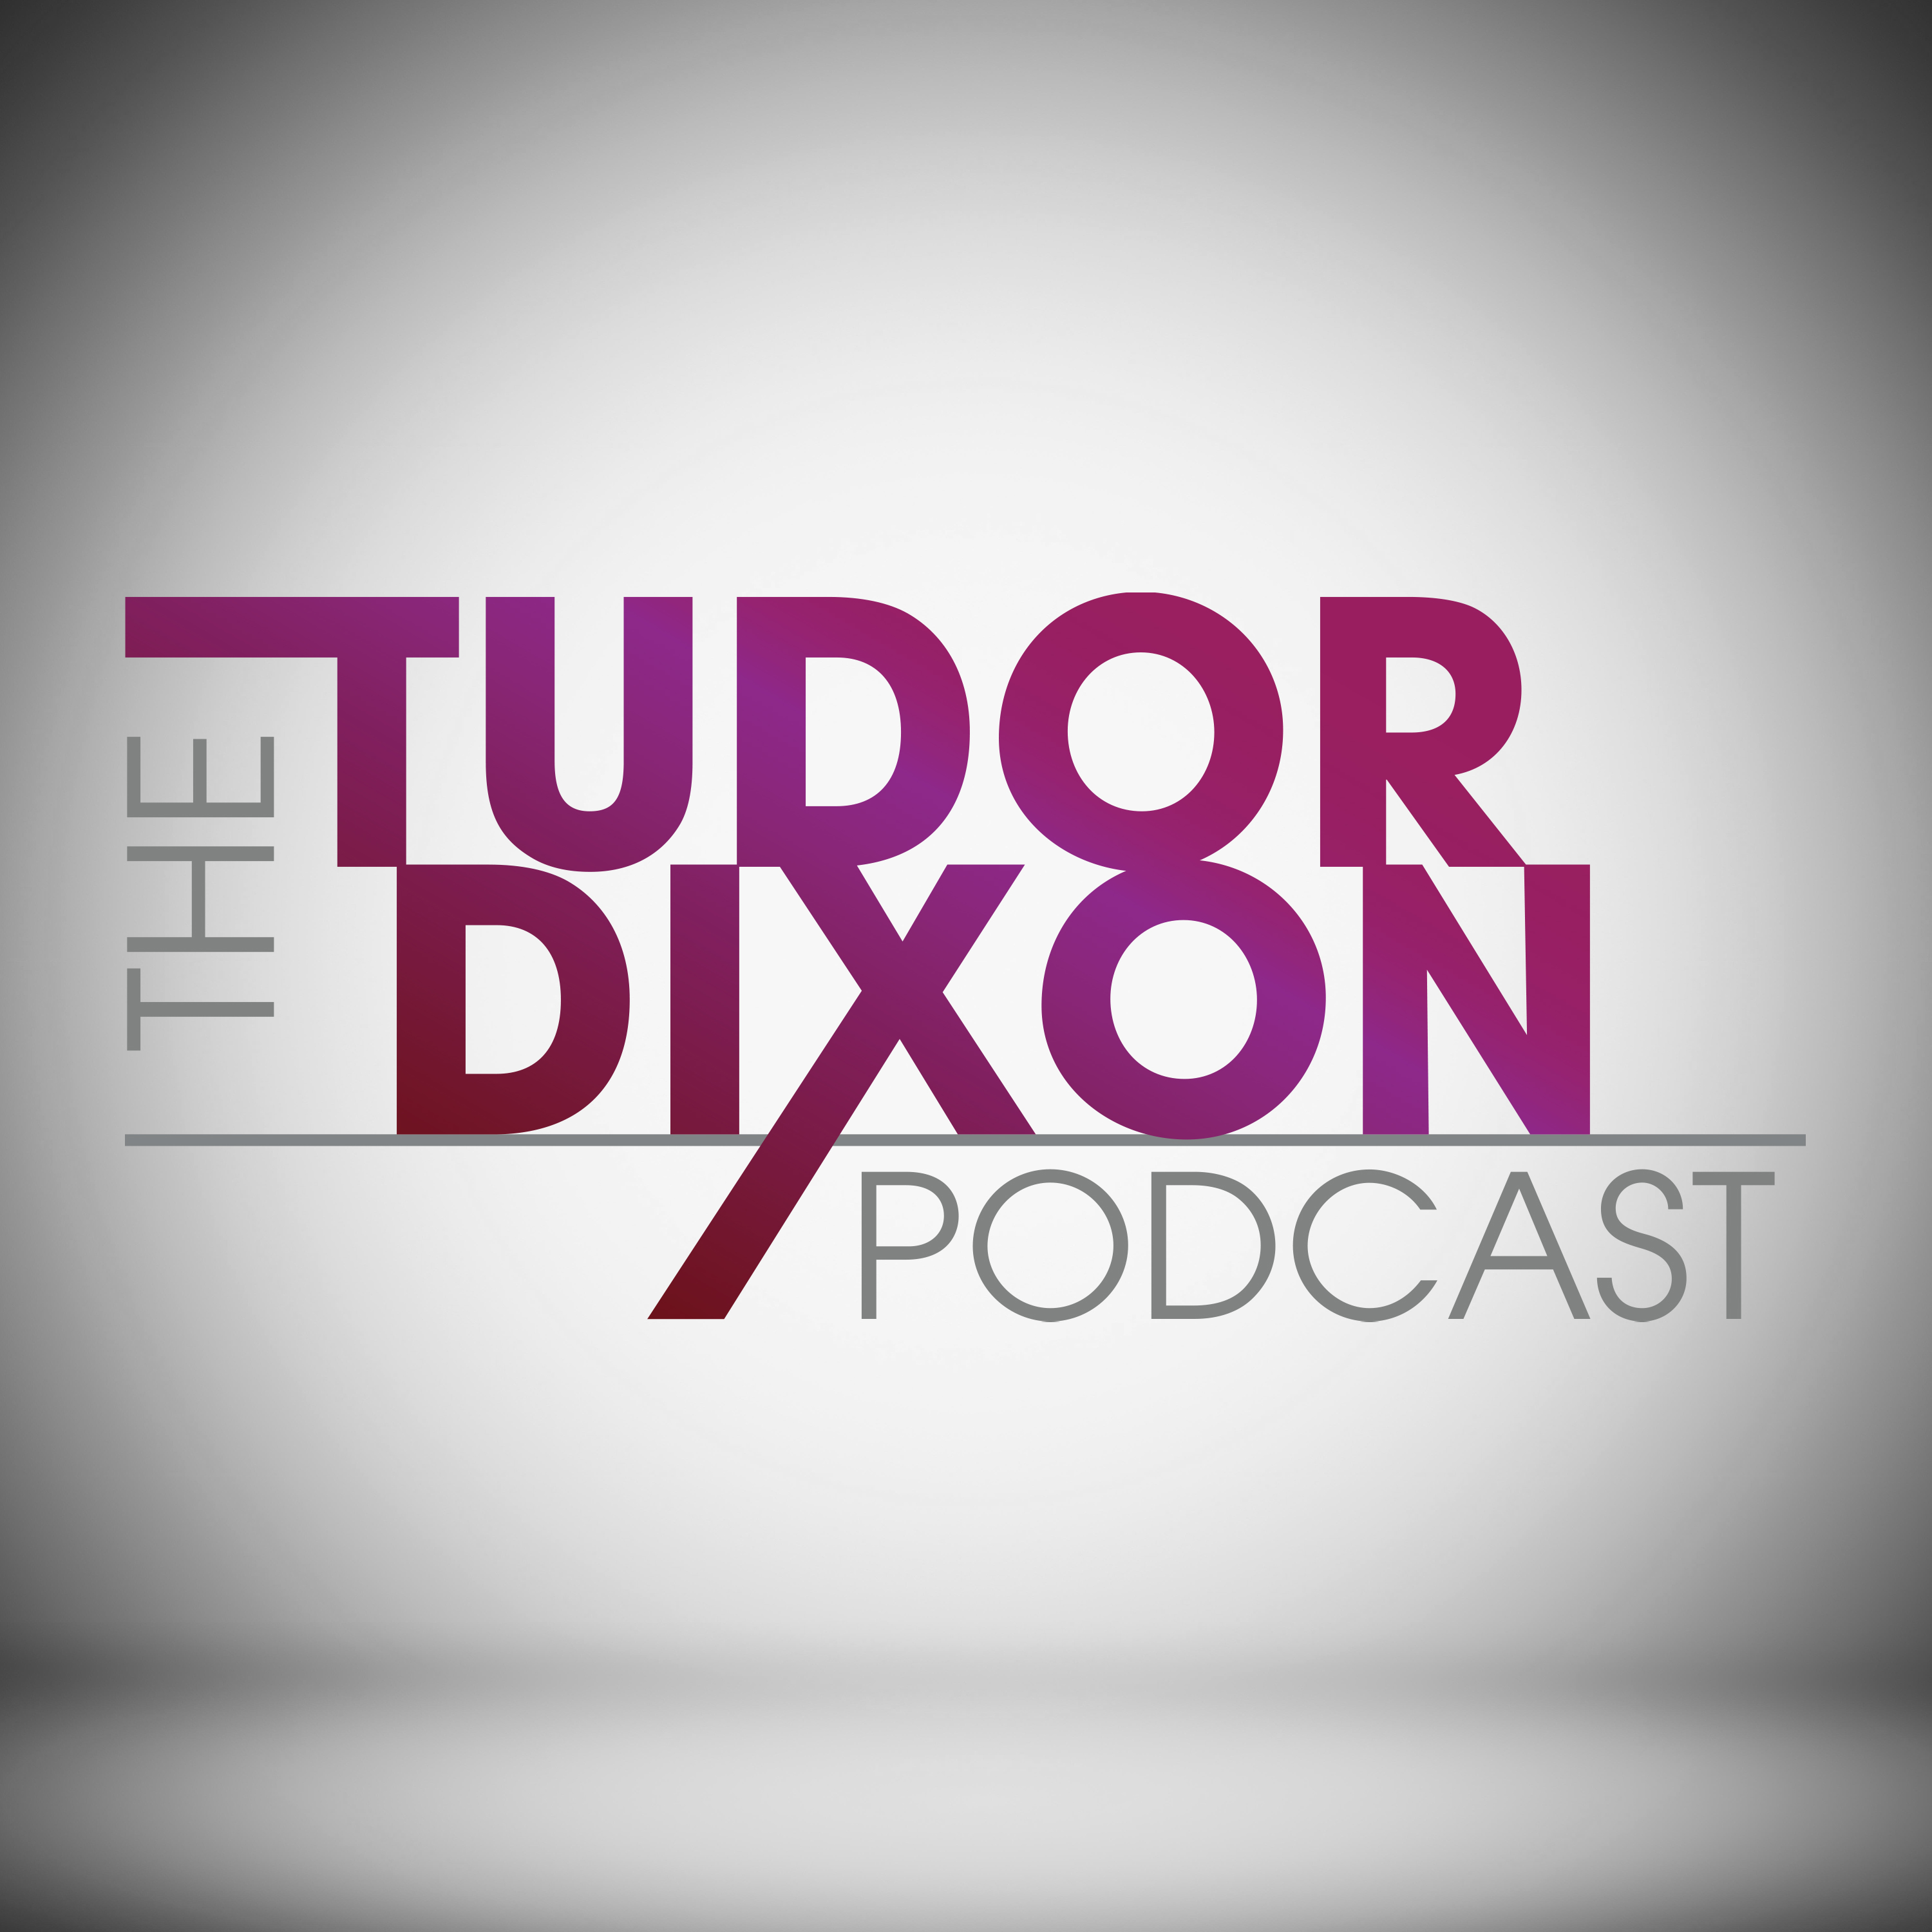 The Tudor Dixon Podcast: From Menendez to Biden and Beyond...